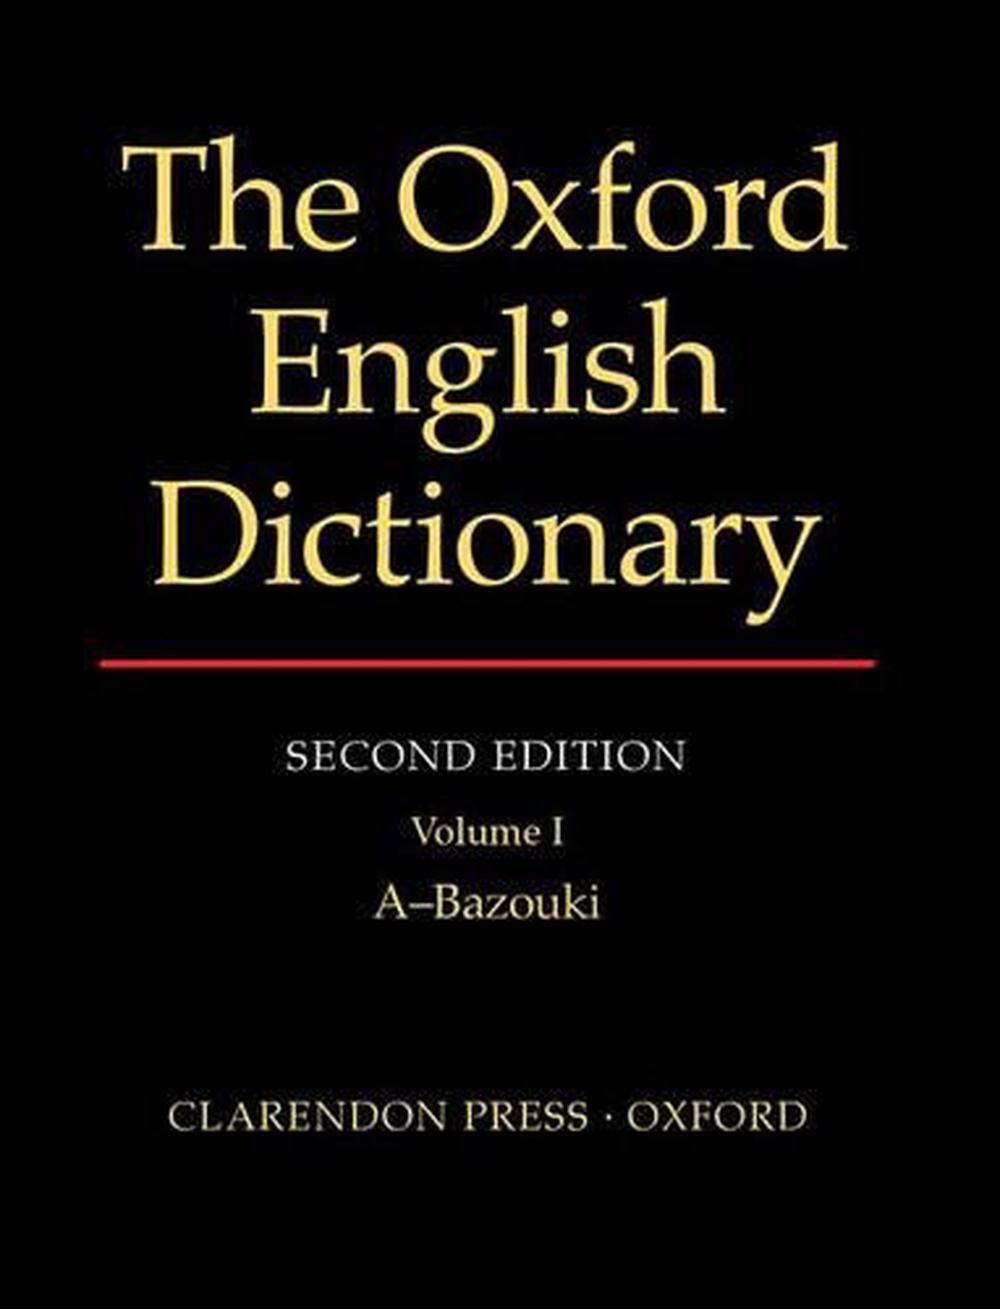 oxford illustrated dictionary pdf free download